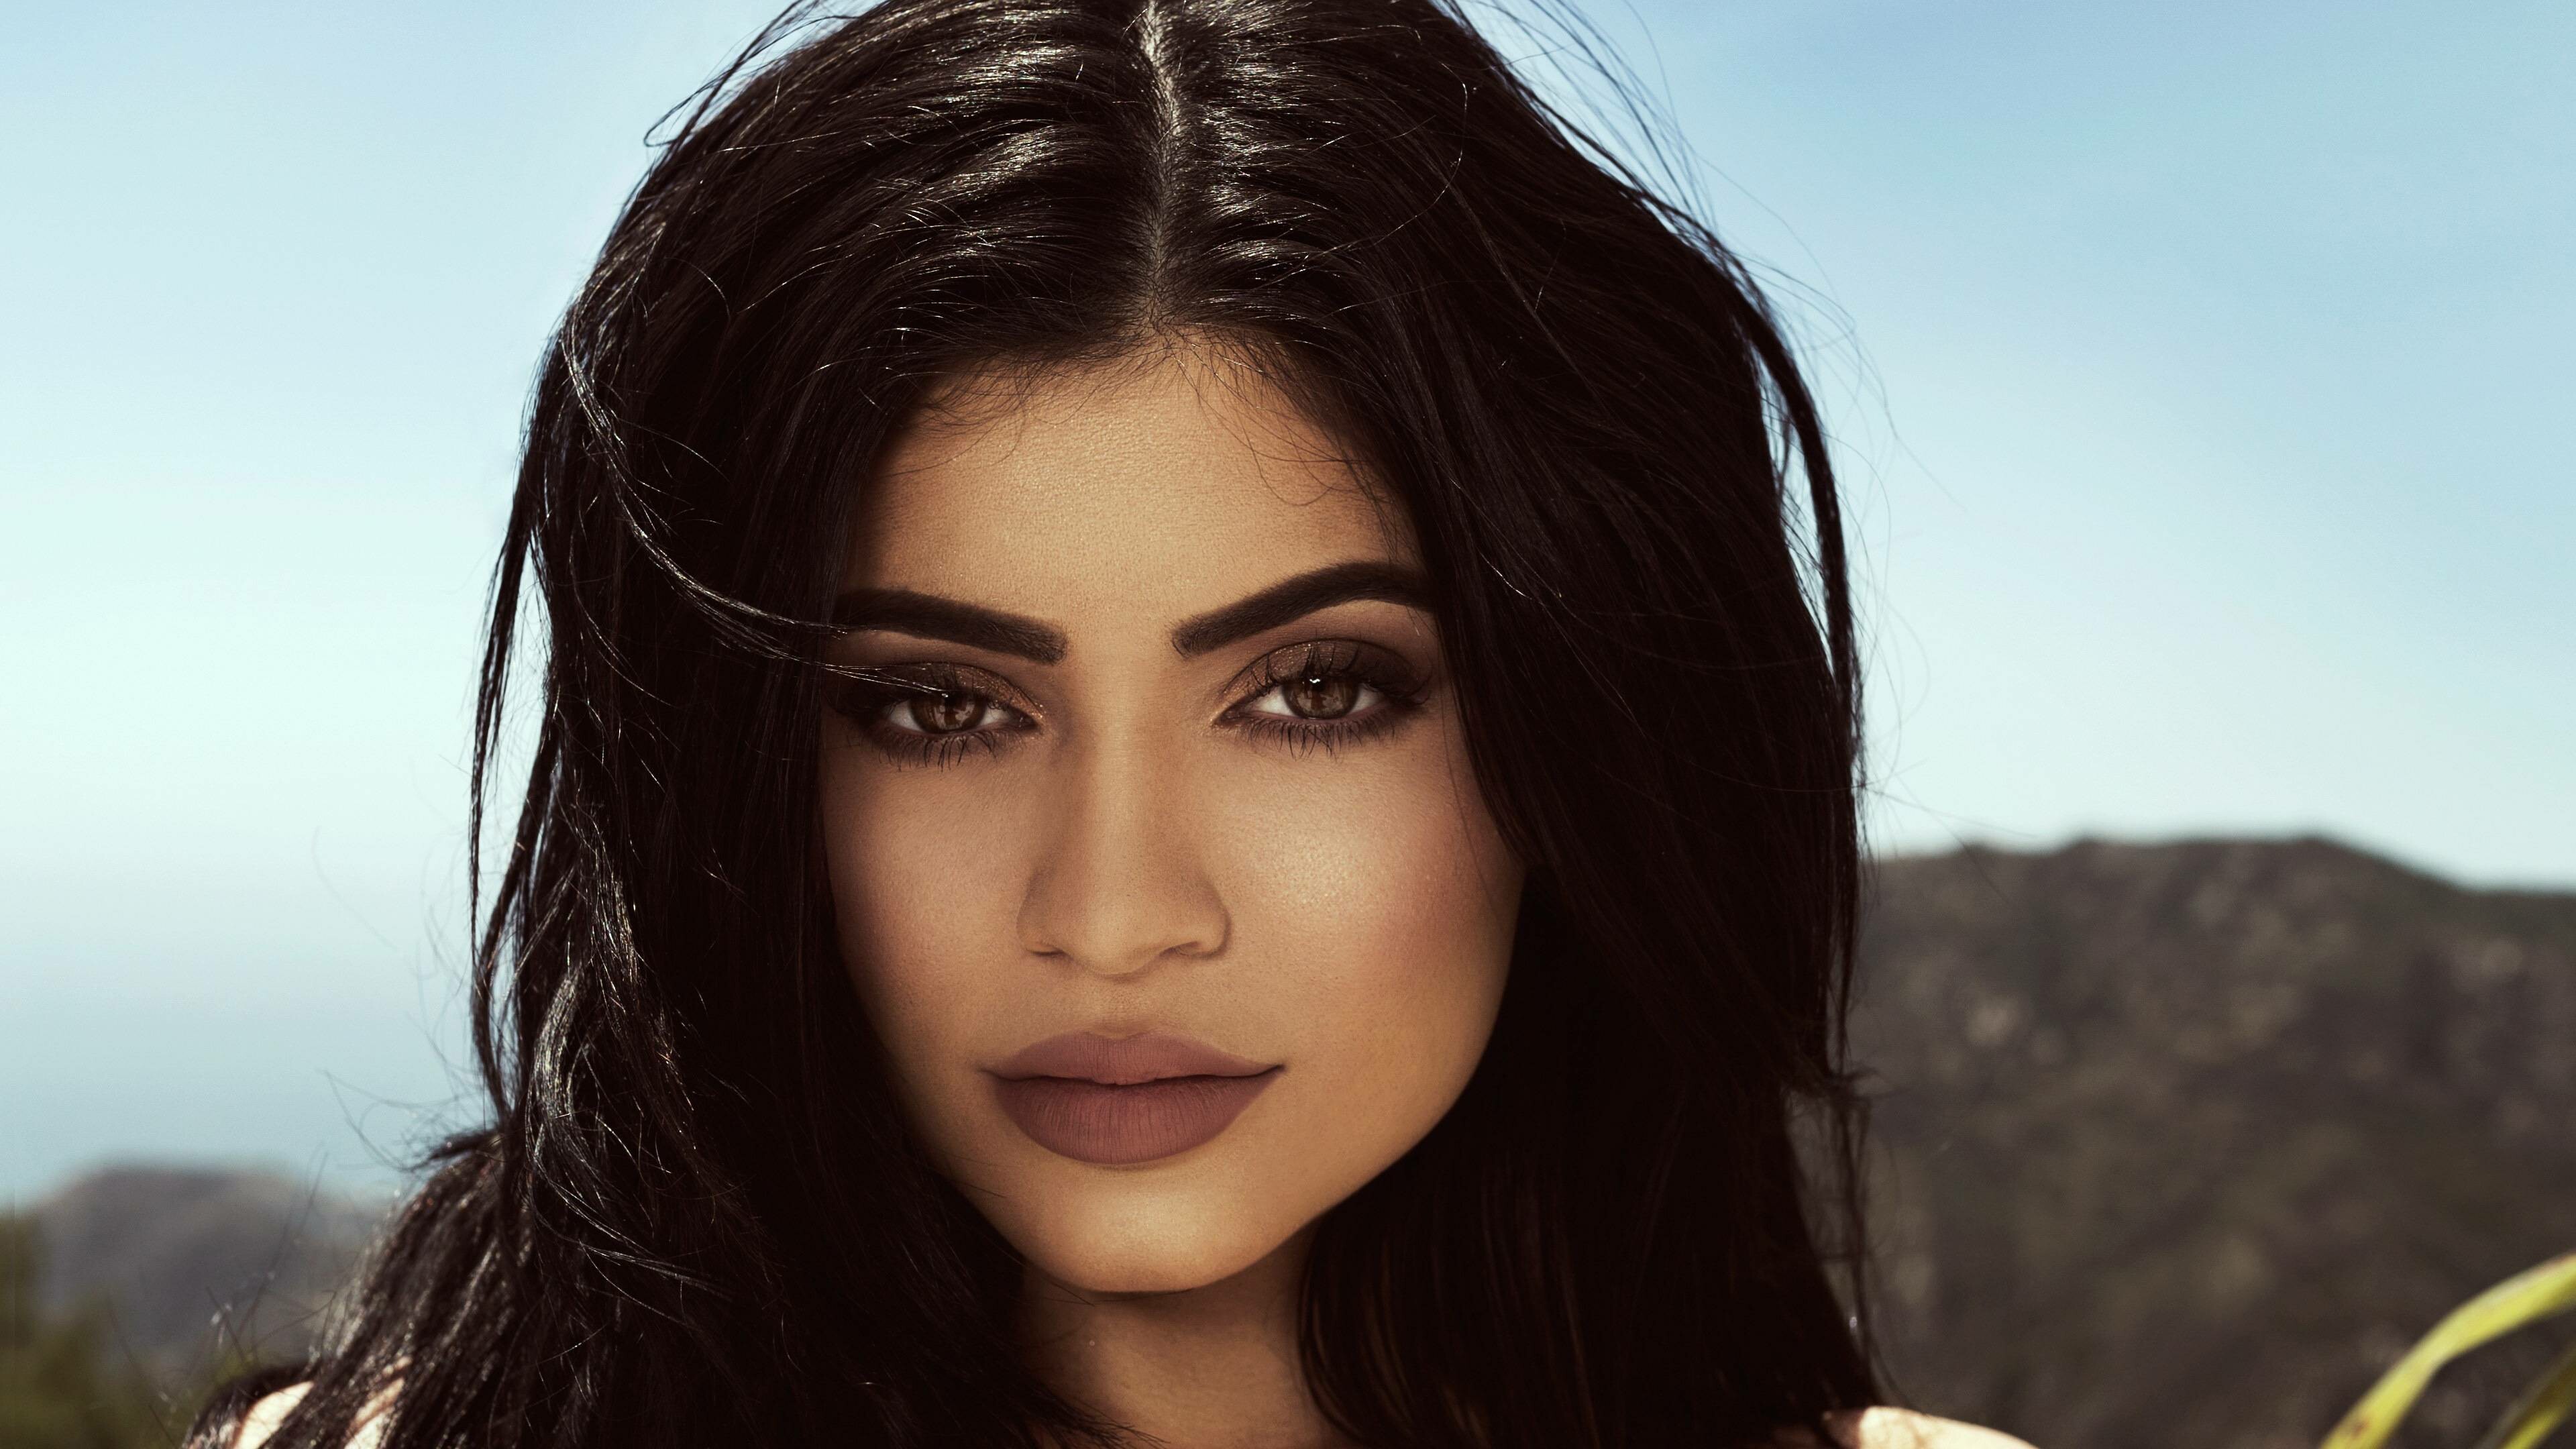 Kylie Jenner New Photoshoot Wallpapers